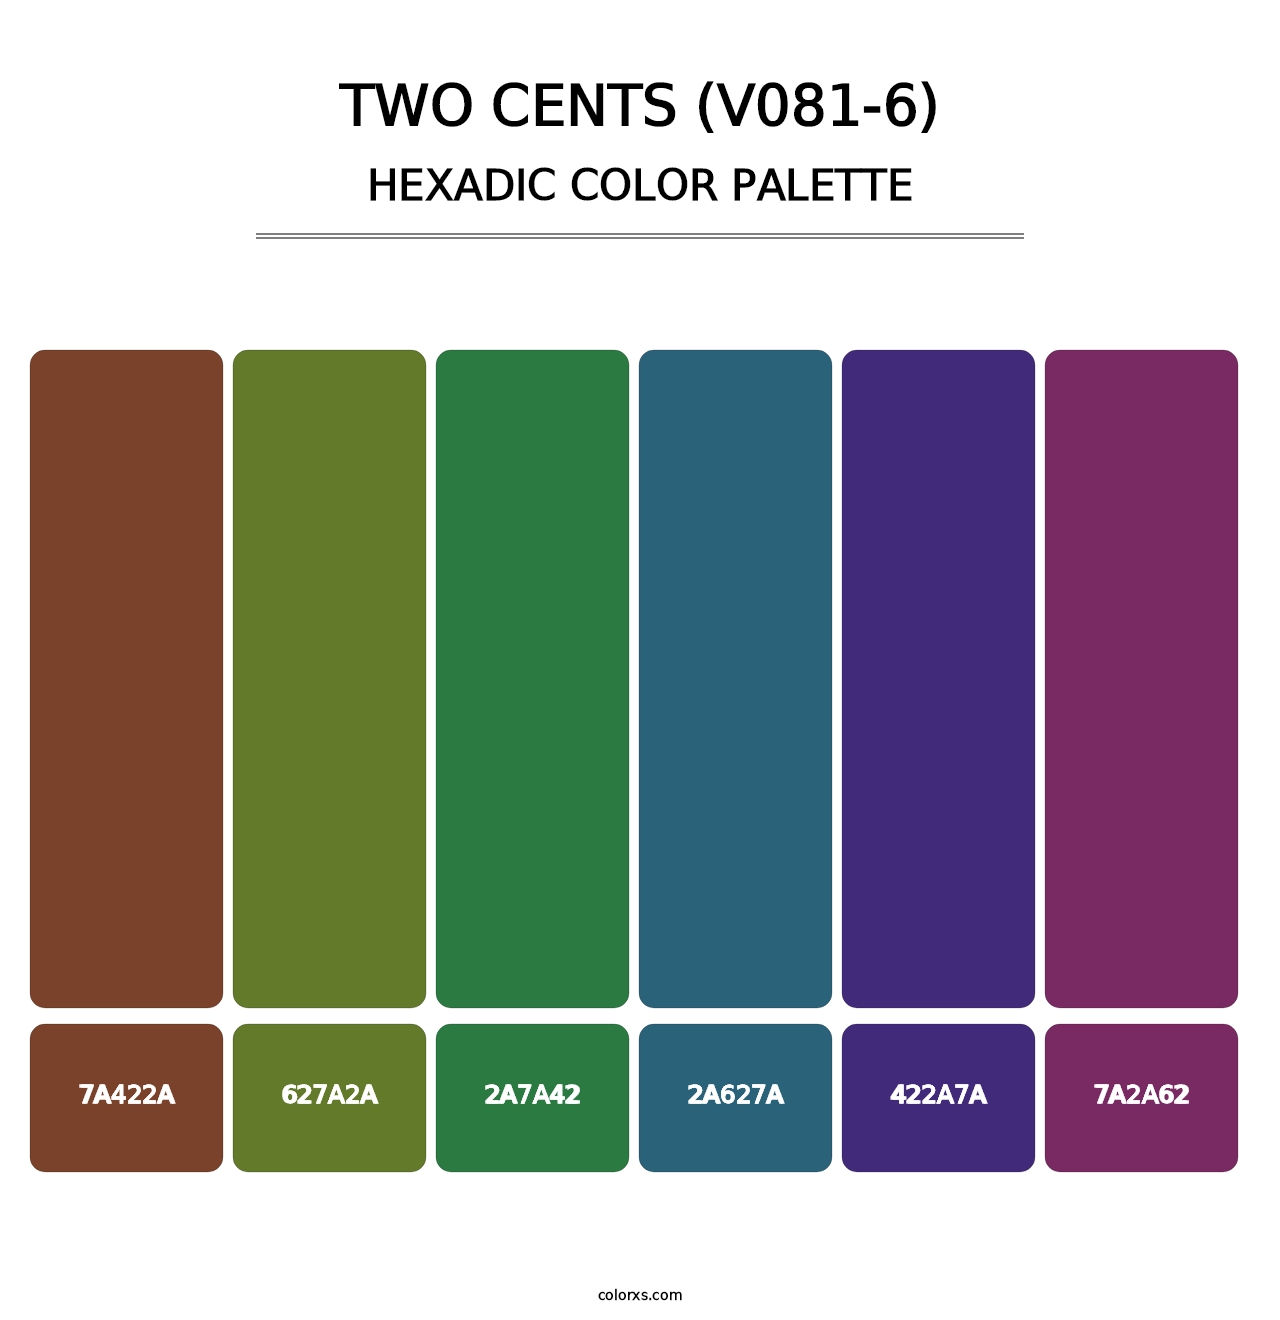 Two Cents (V081-6) - Hexadic Color Palette